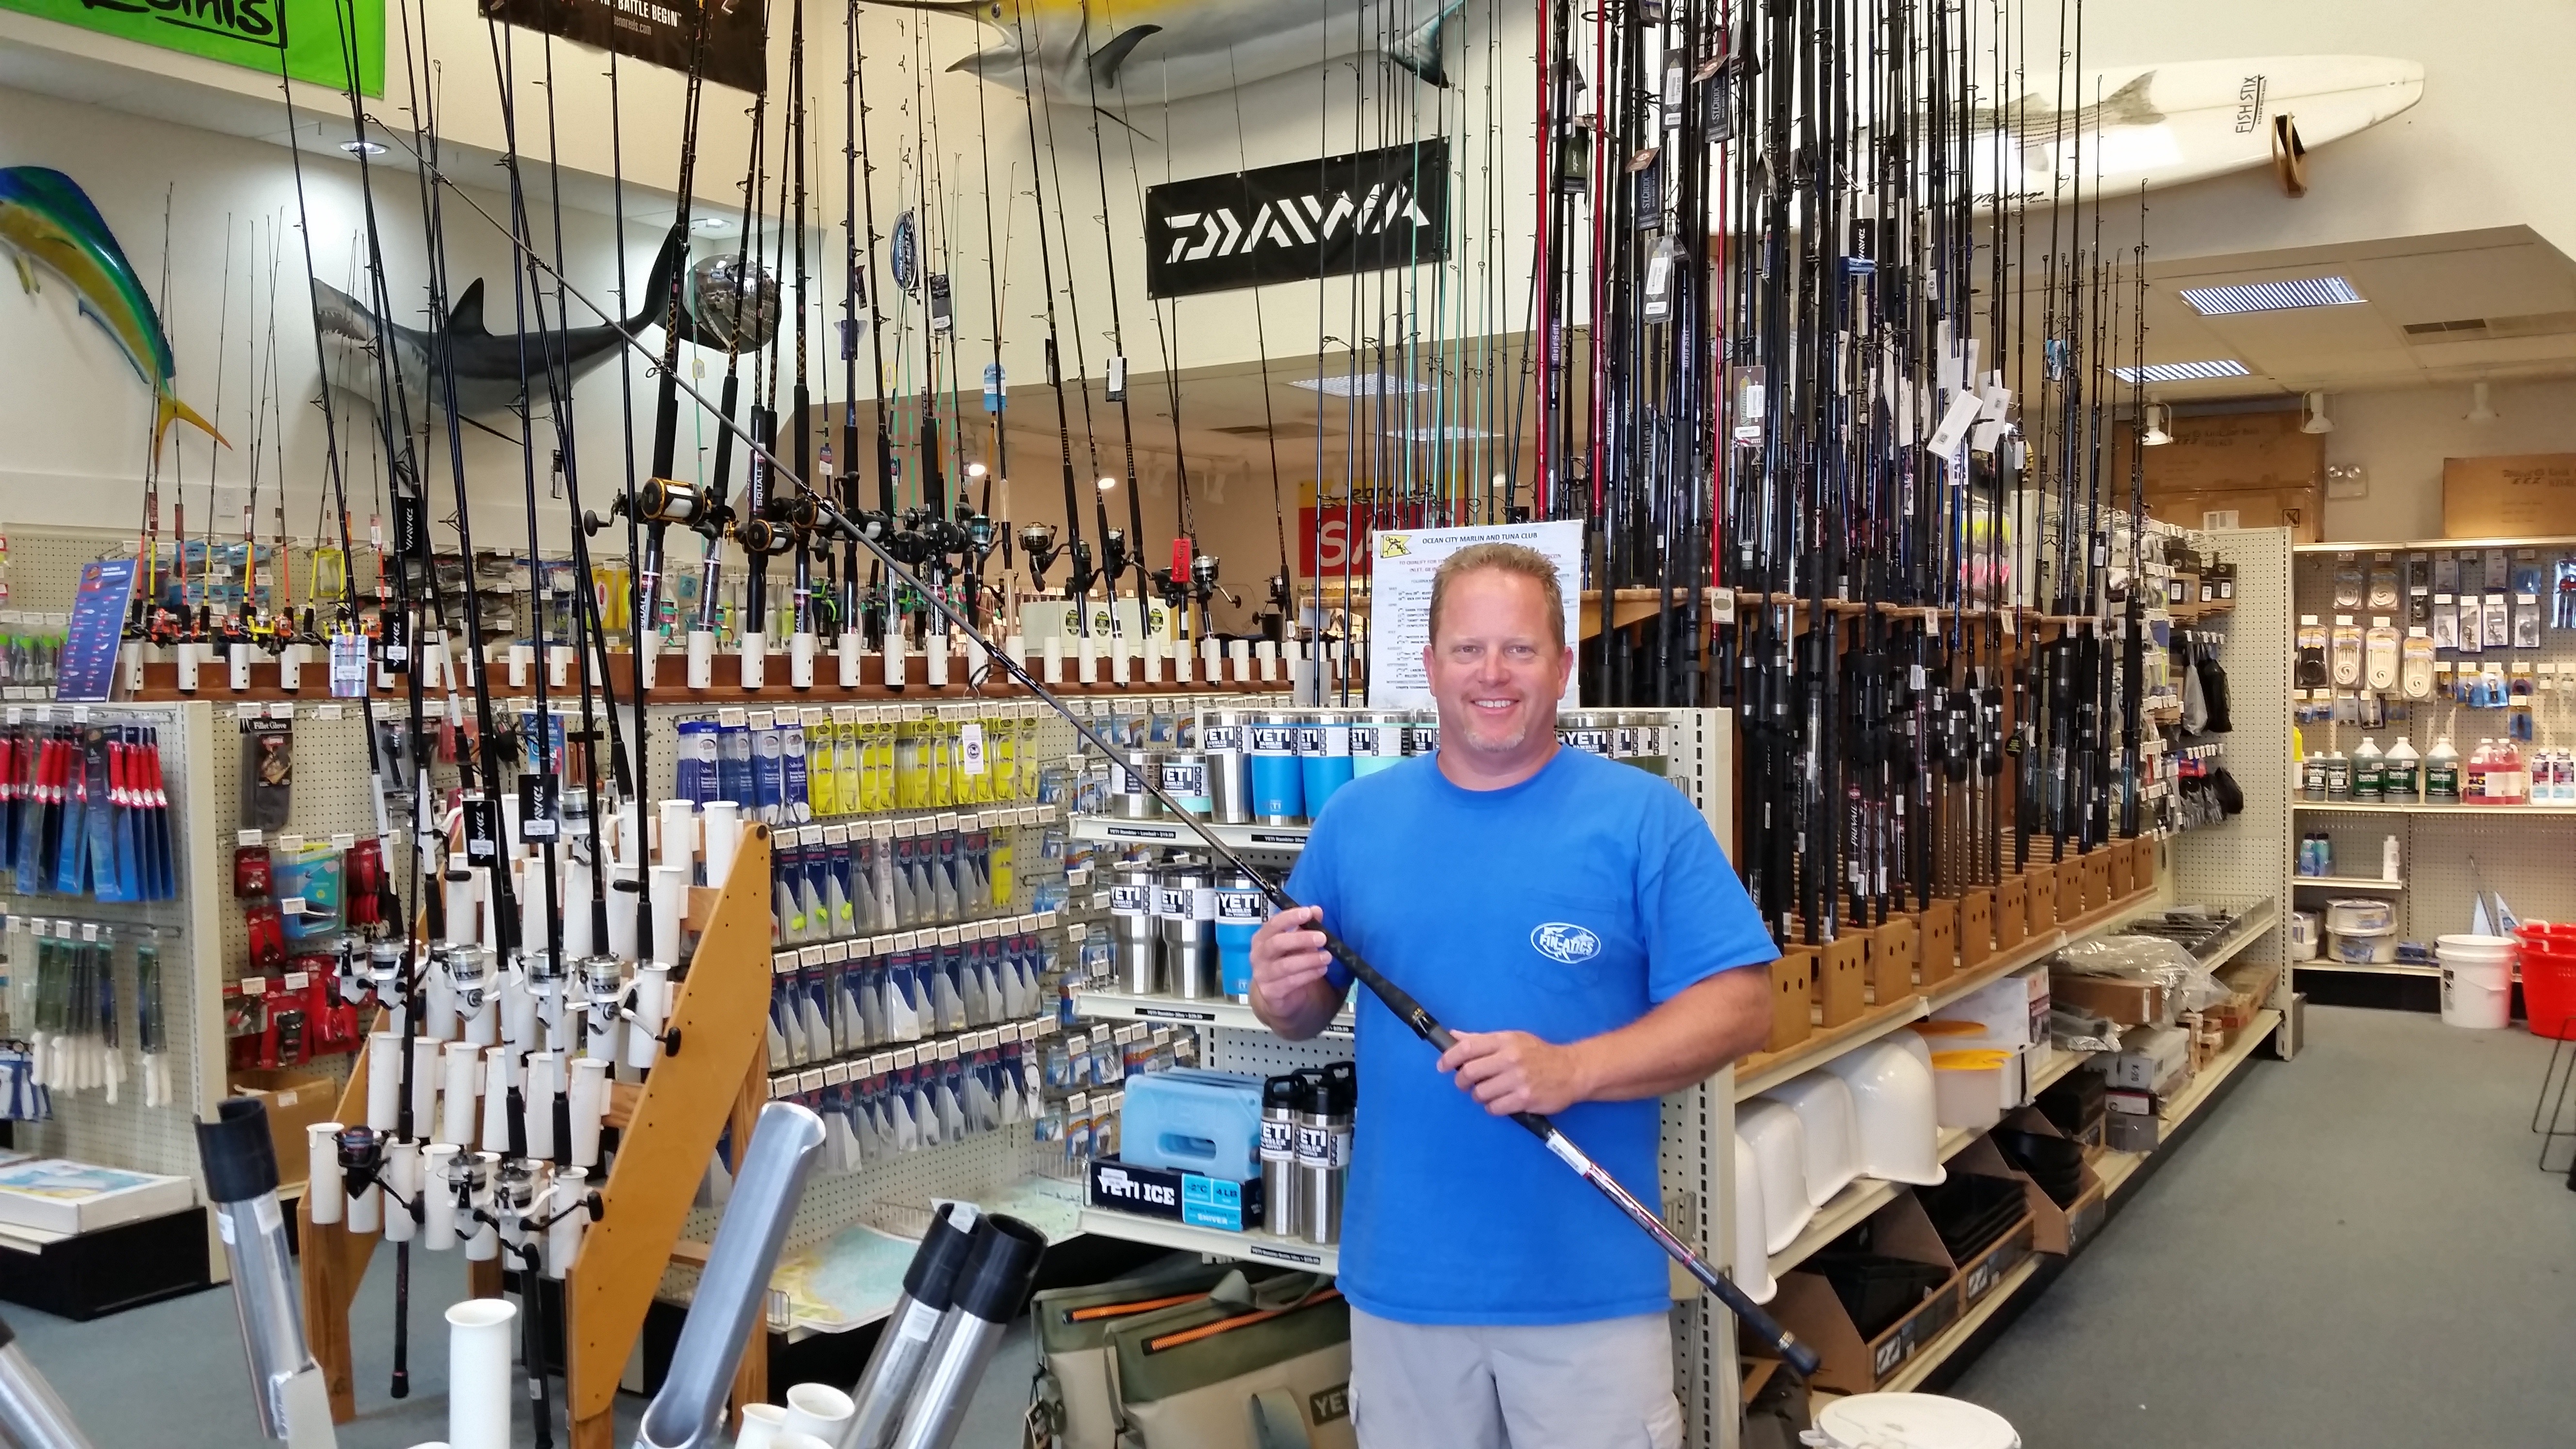 Fin-Atics Sells Hooks, Lines, Sinkers and Everything Else for Fishing